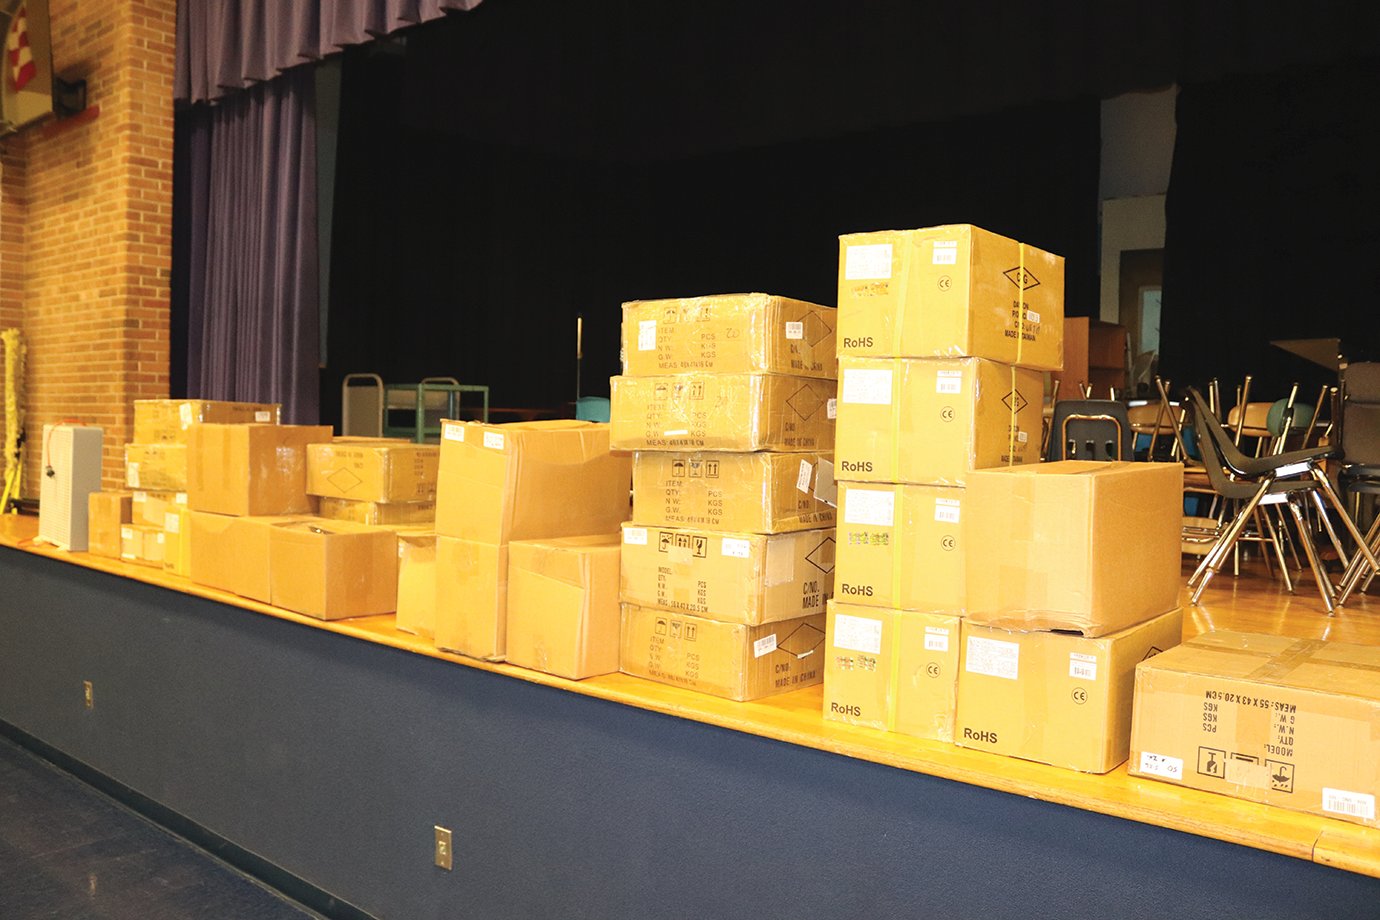 Boxes containing new Google Chromebooks wait to be opened in the cafeteria at Fountain Central Jr.-Sr. High School for those who signed up for online learning courses.